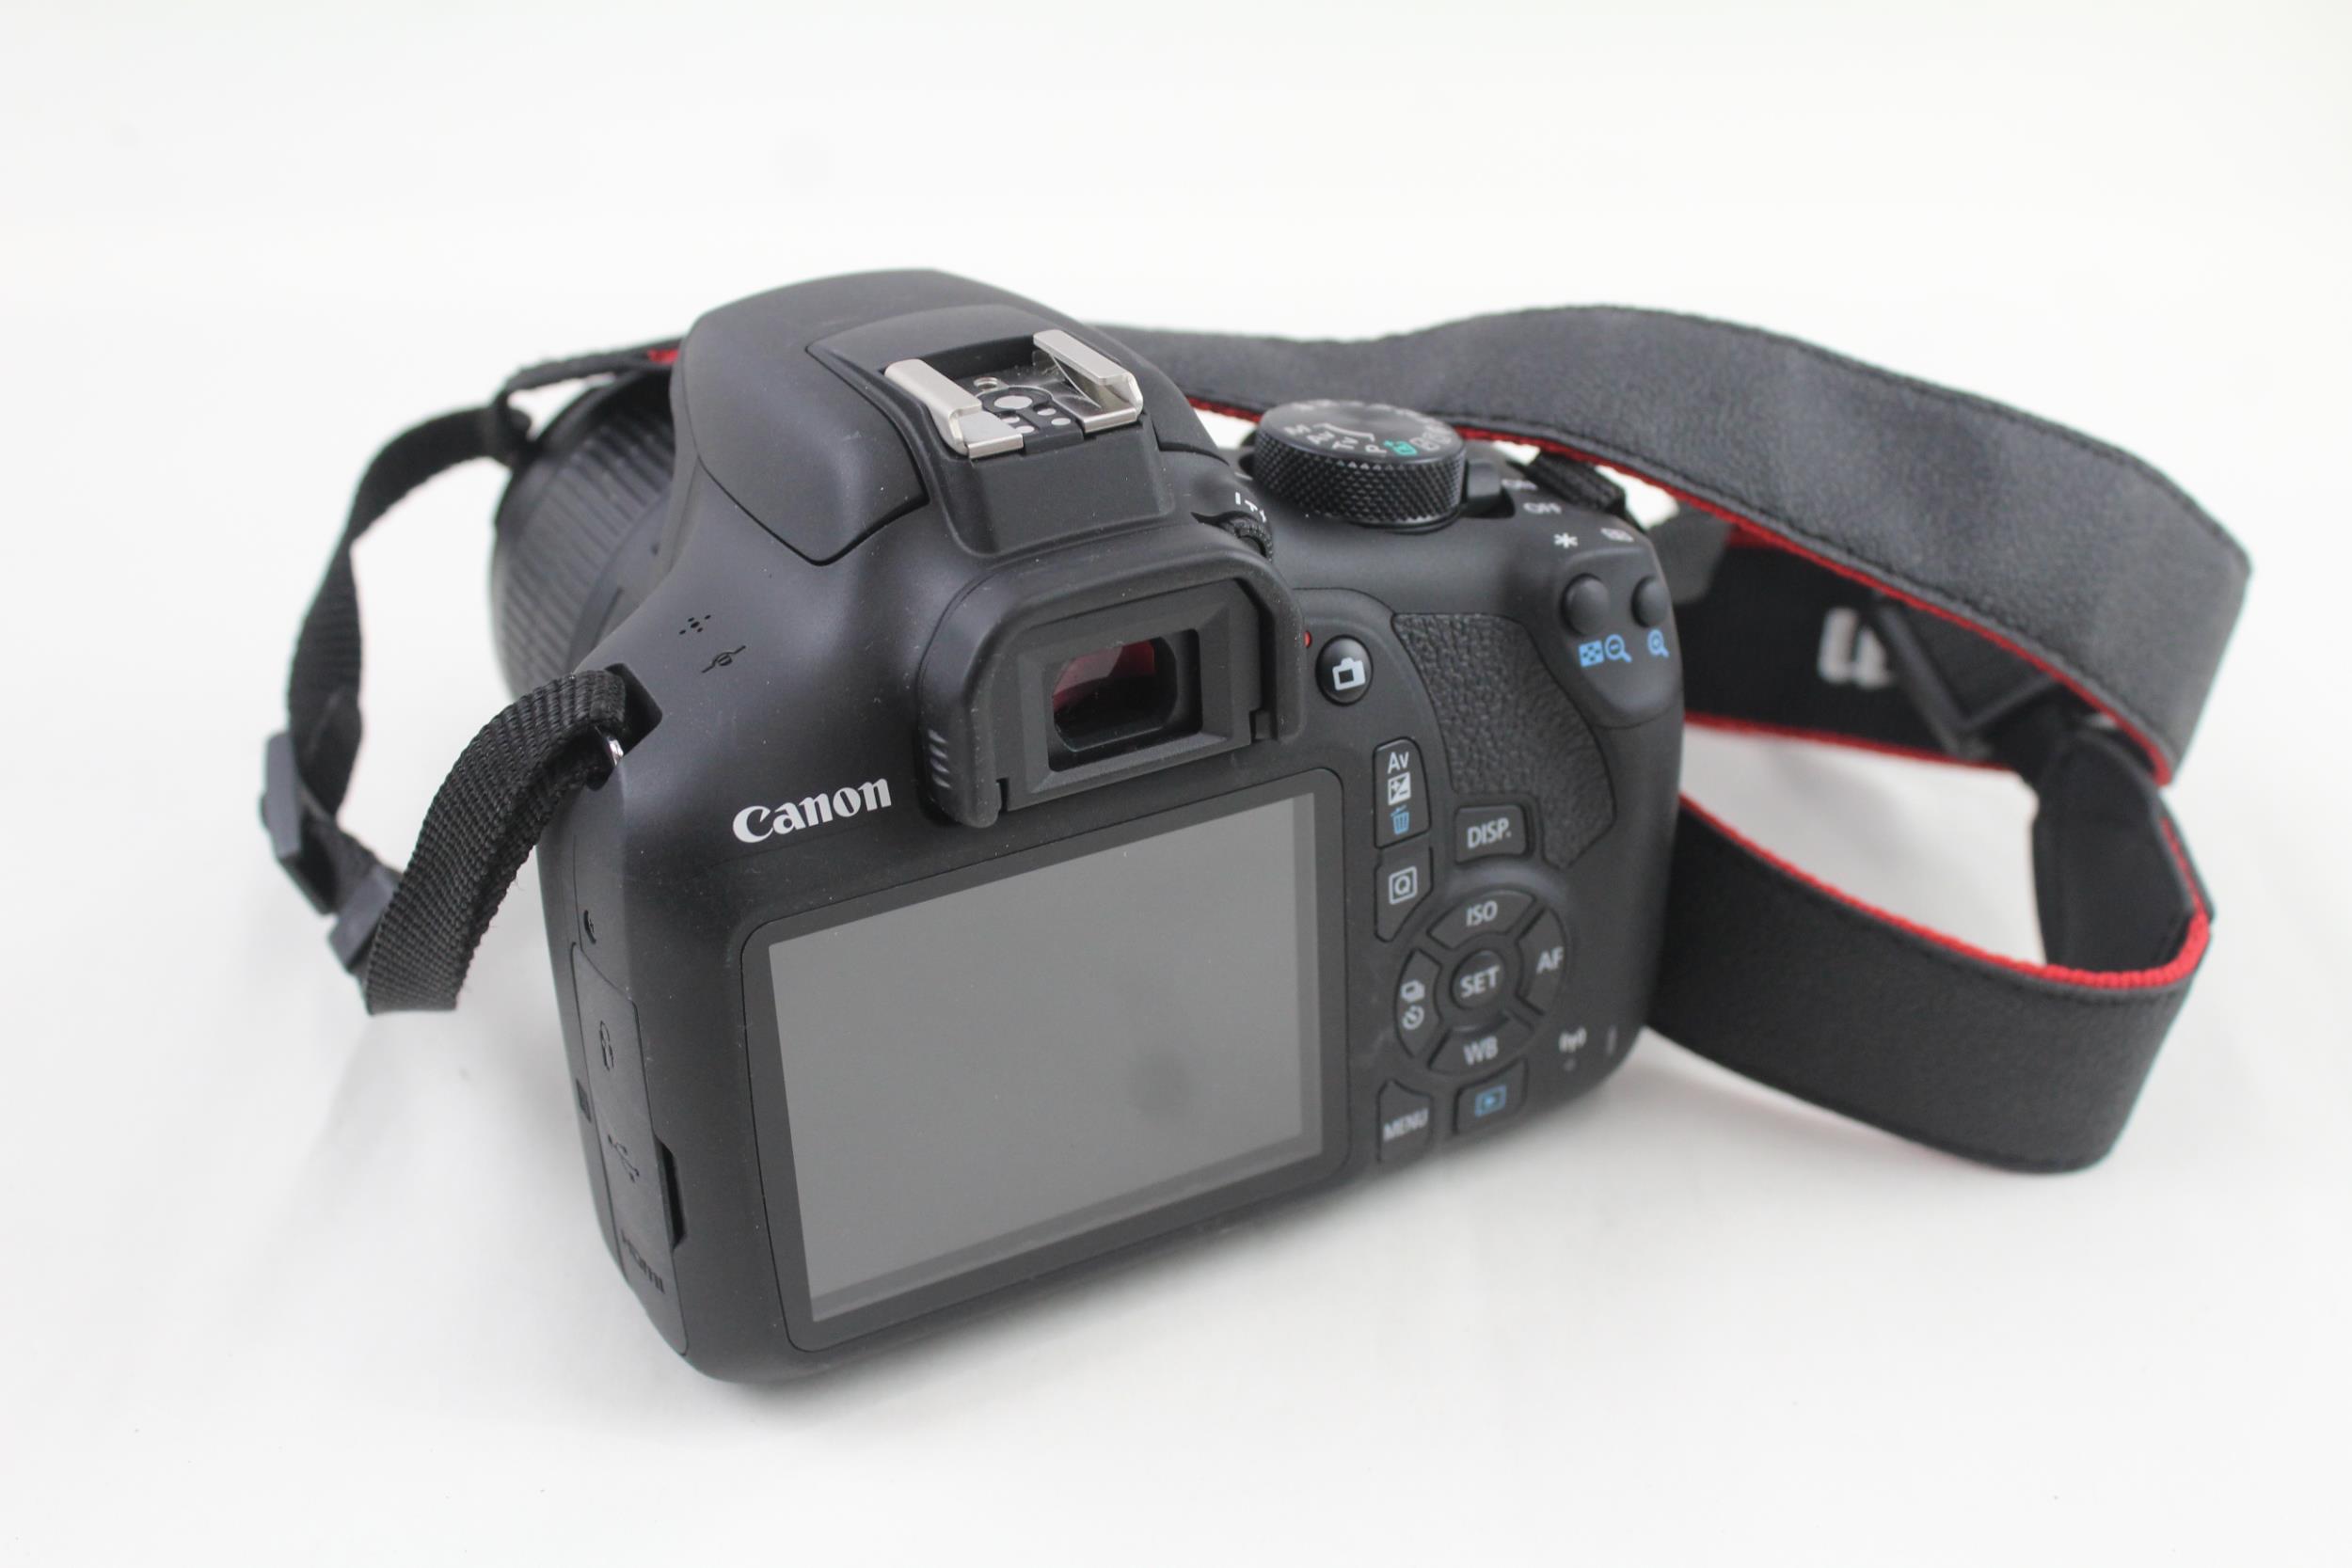 Canon EOS 1300D DSLR Digital Camera Working w/ Canon EF-S 18-55mm F/3.5-5.6 III - Canon EOS 1300D - Image 6 of 6